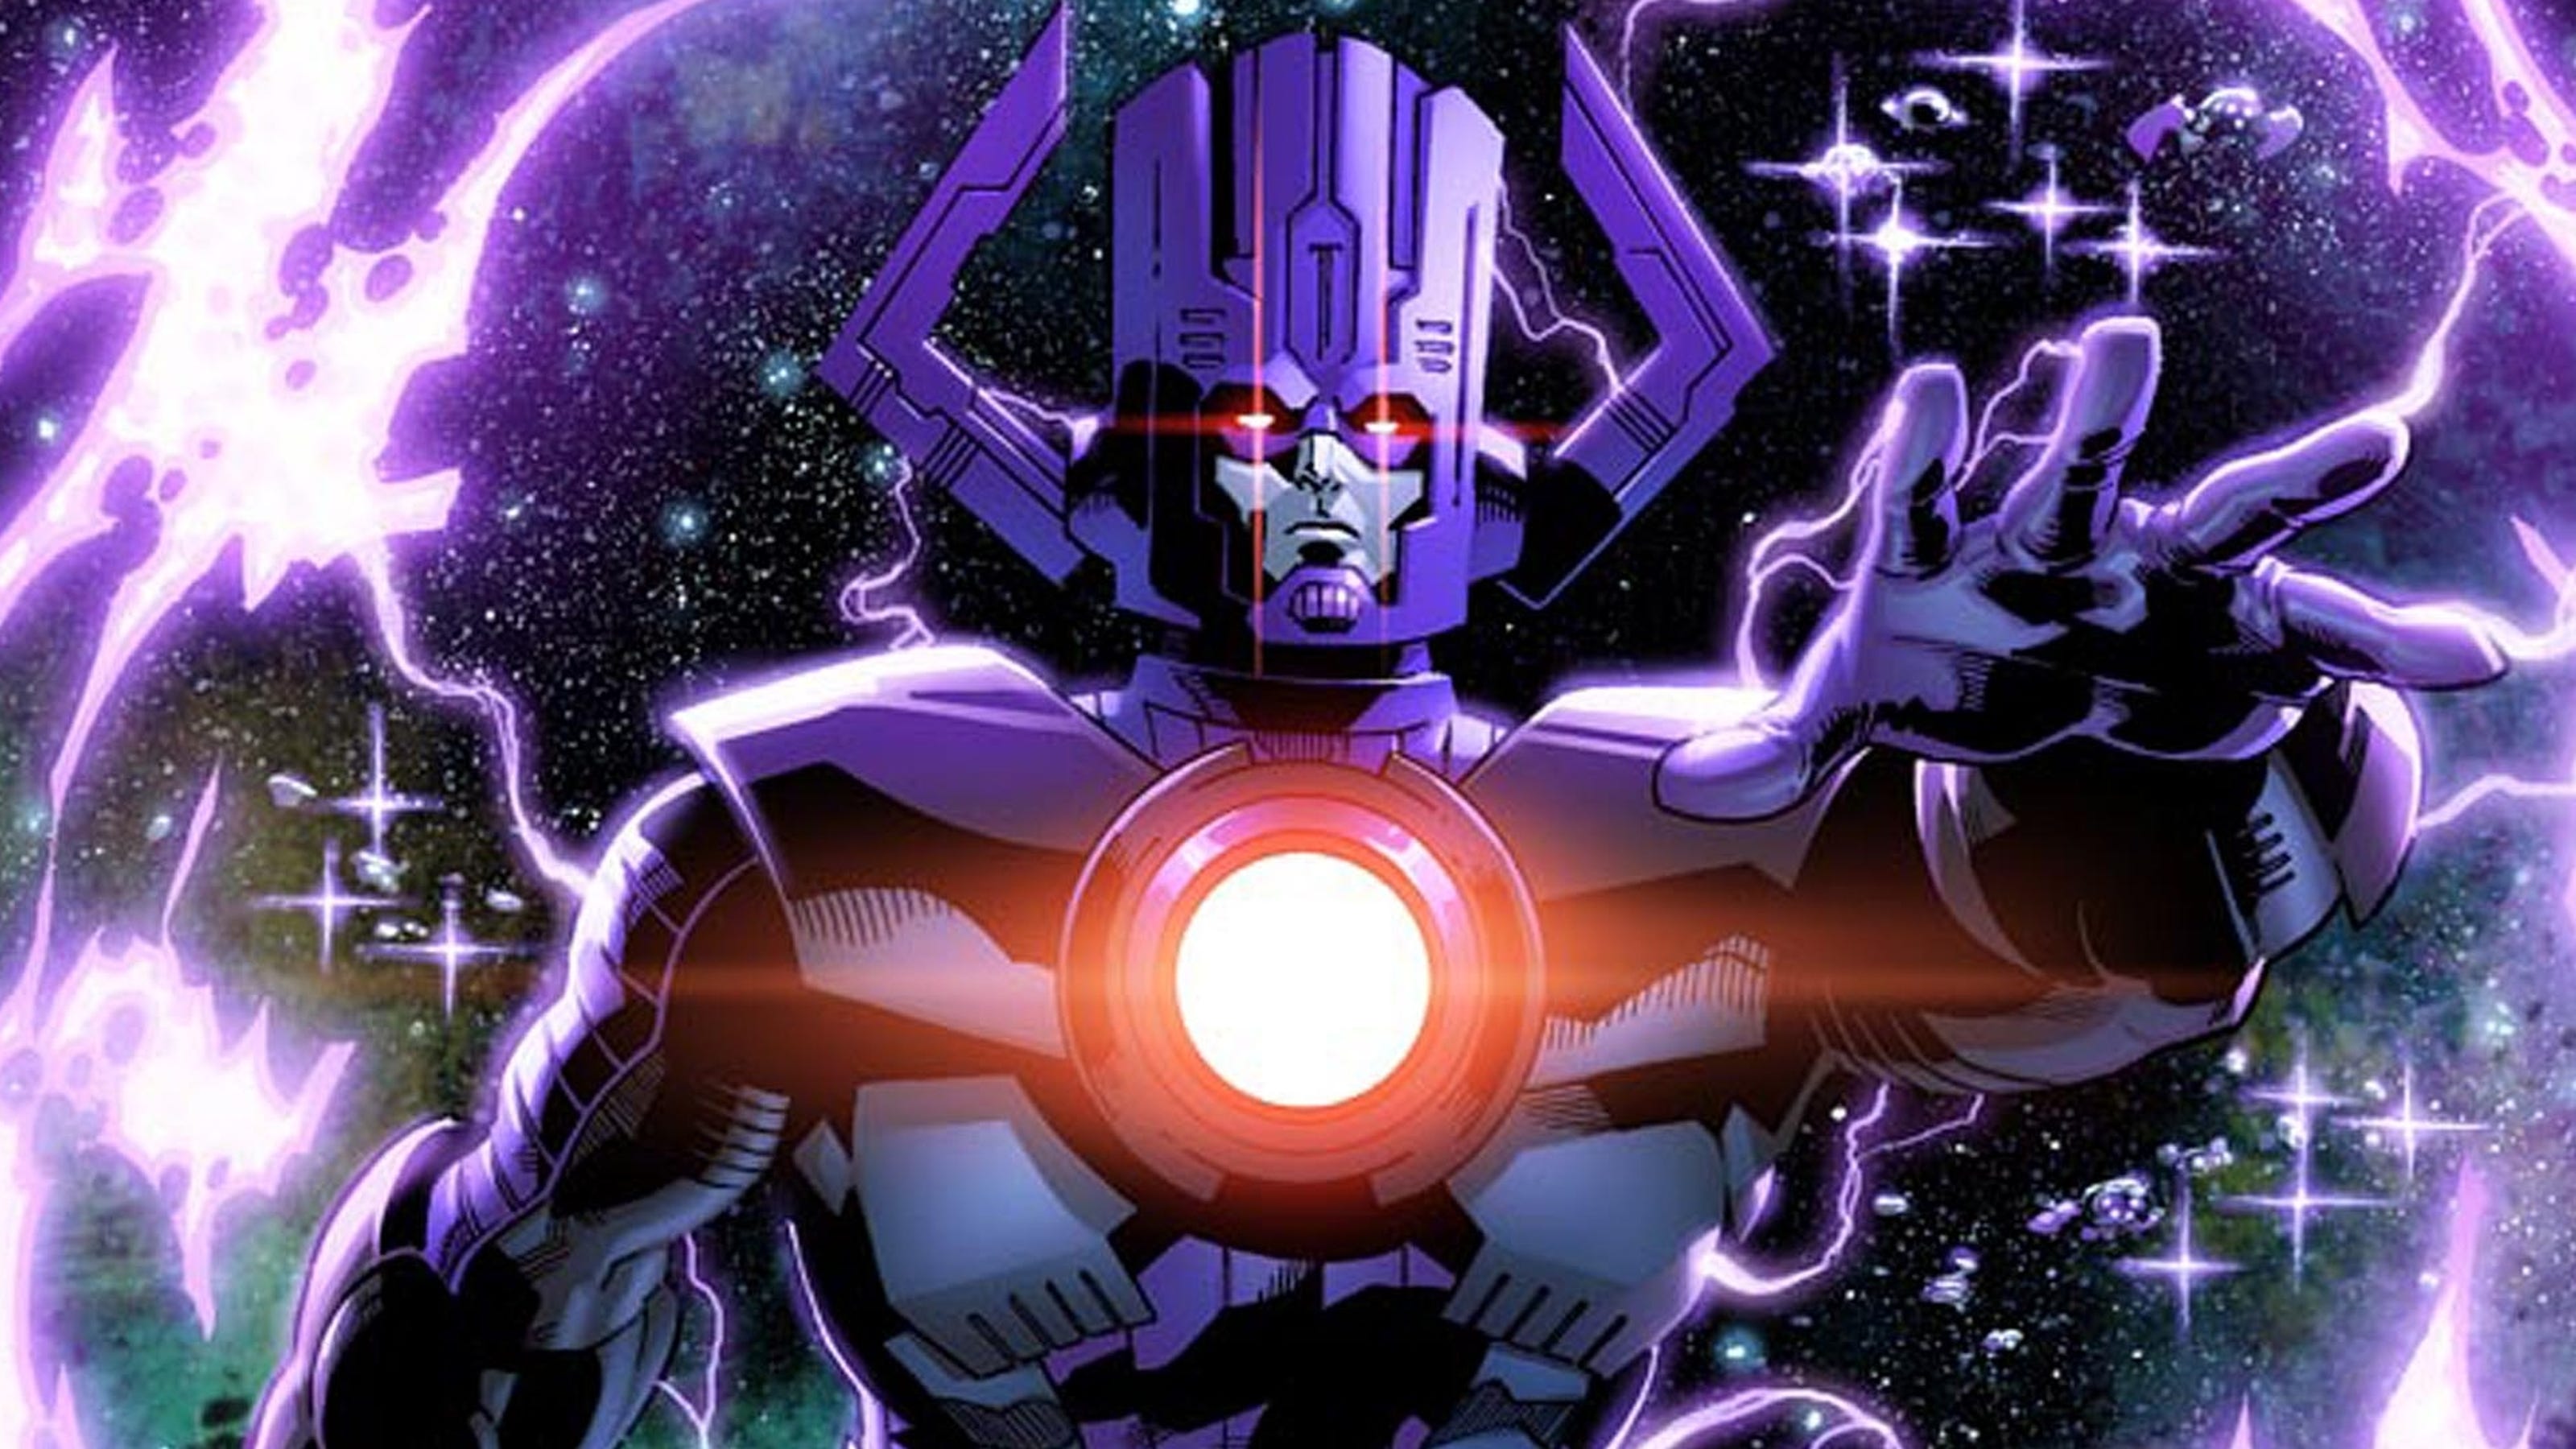 Galactus is on a mission to devour in Marvel's 'Hunger'3200 x 1800